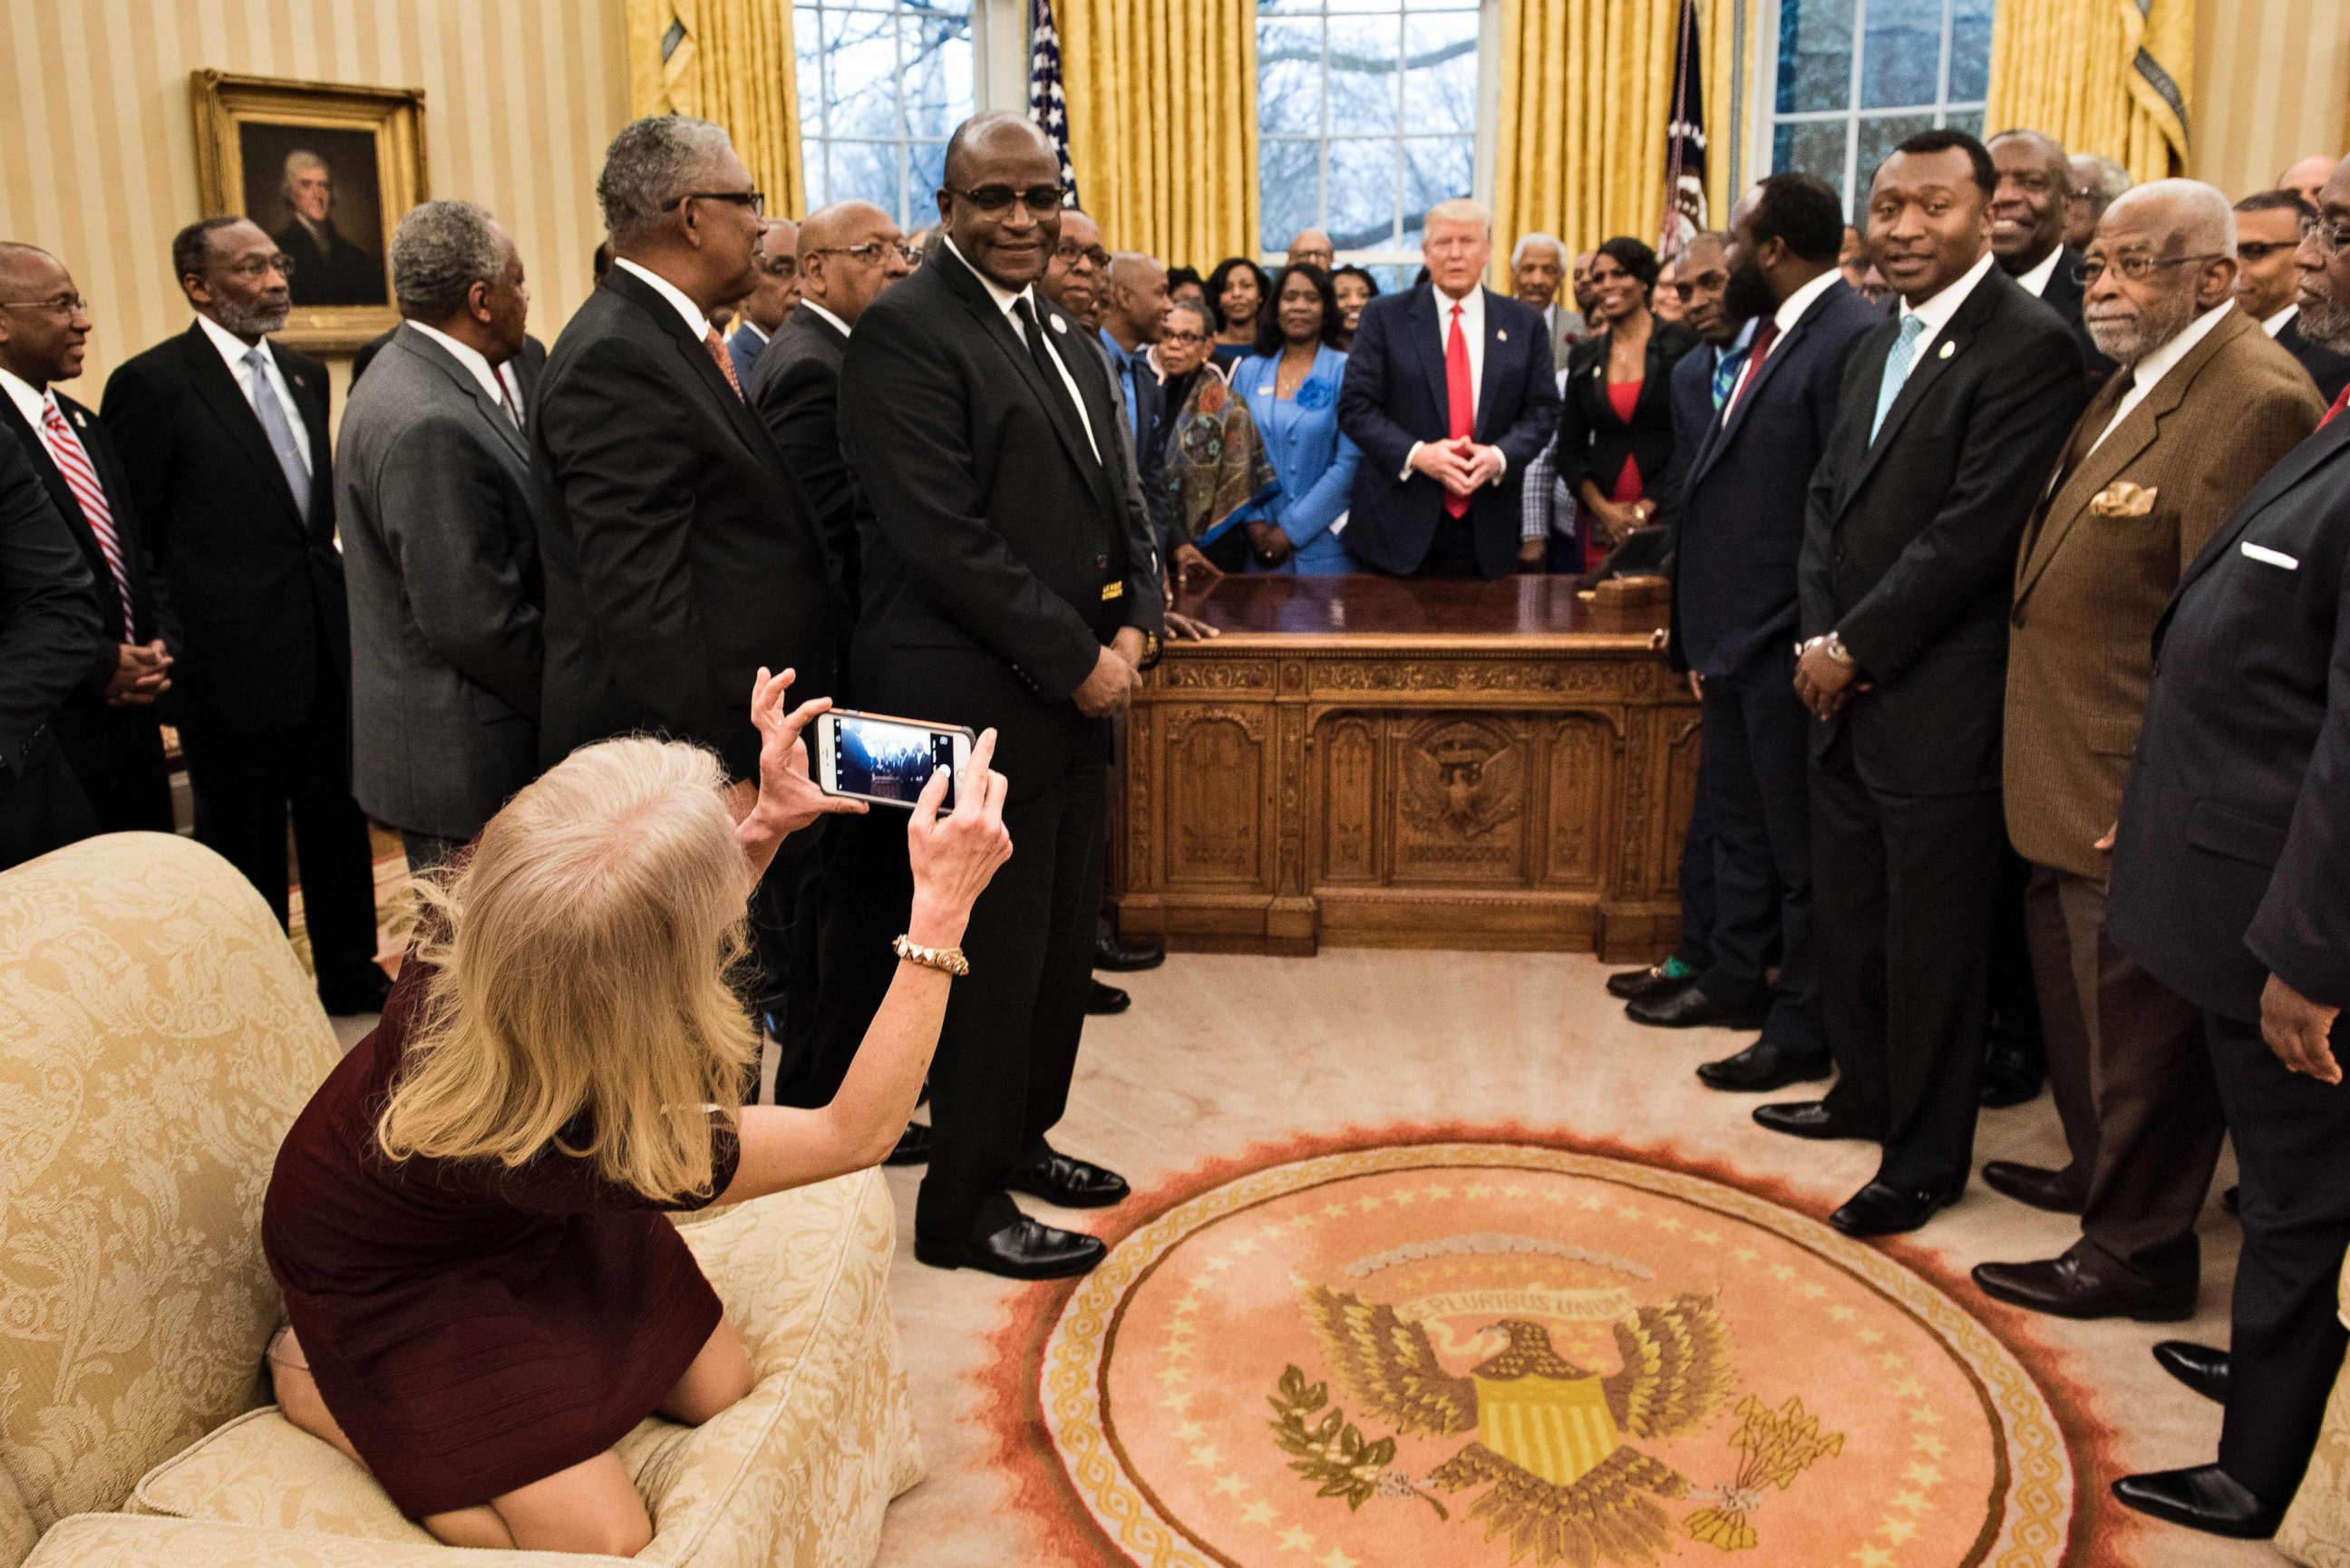 PHOTO: Counselor to the President, Kellyanne Conway, takes a photo as U.S. President Donald Trump and leaders of historically black universities and colleges talk before a group photo in the Oval Office of the White House, Feb. 27, 2017, in Washington.